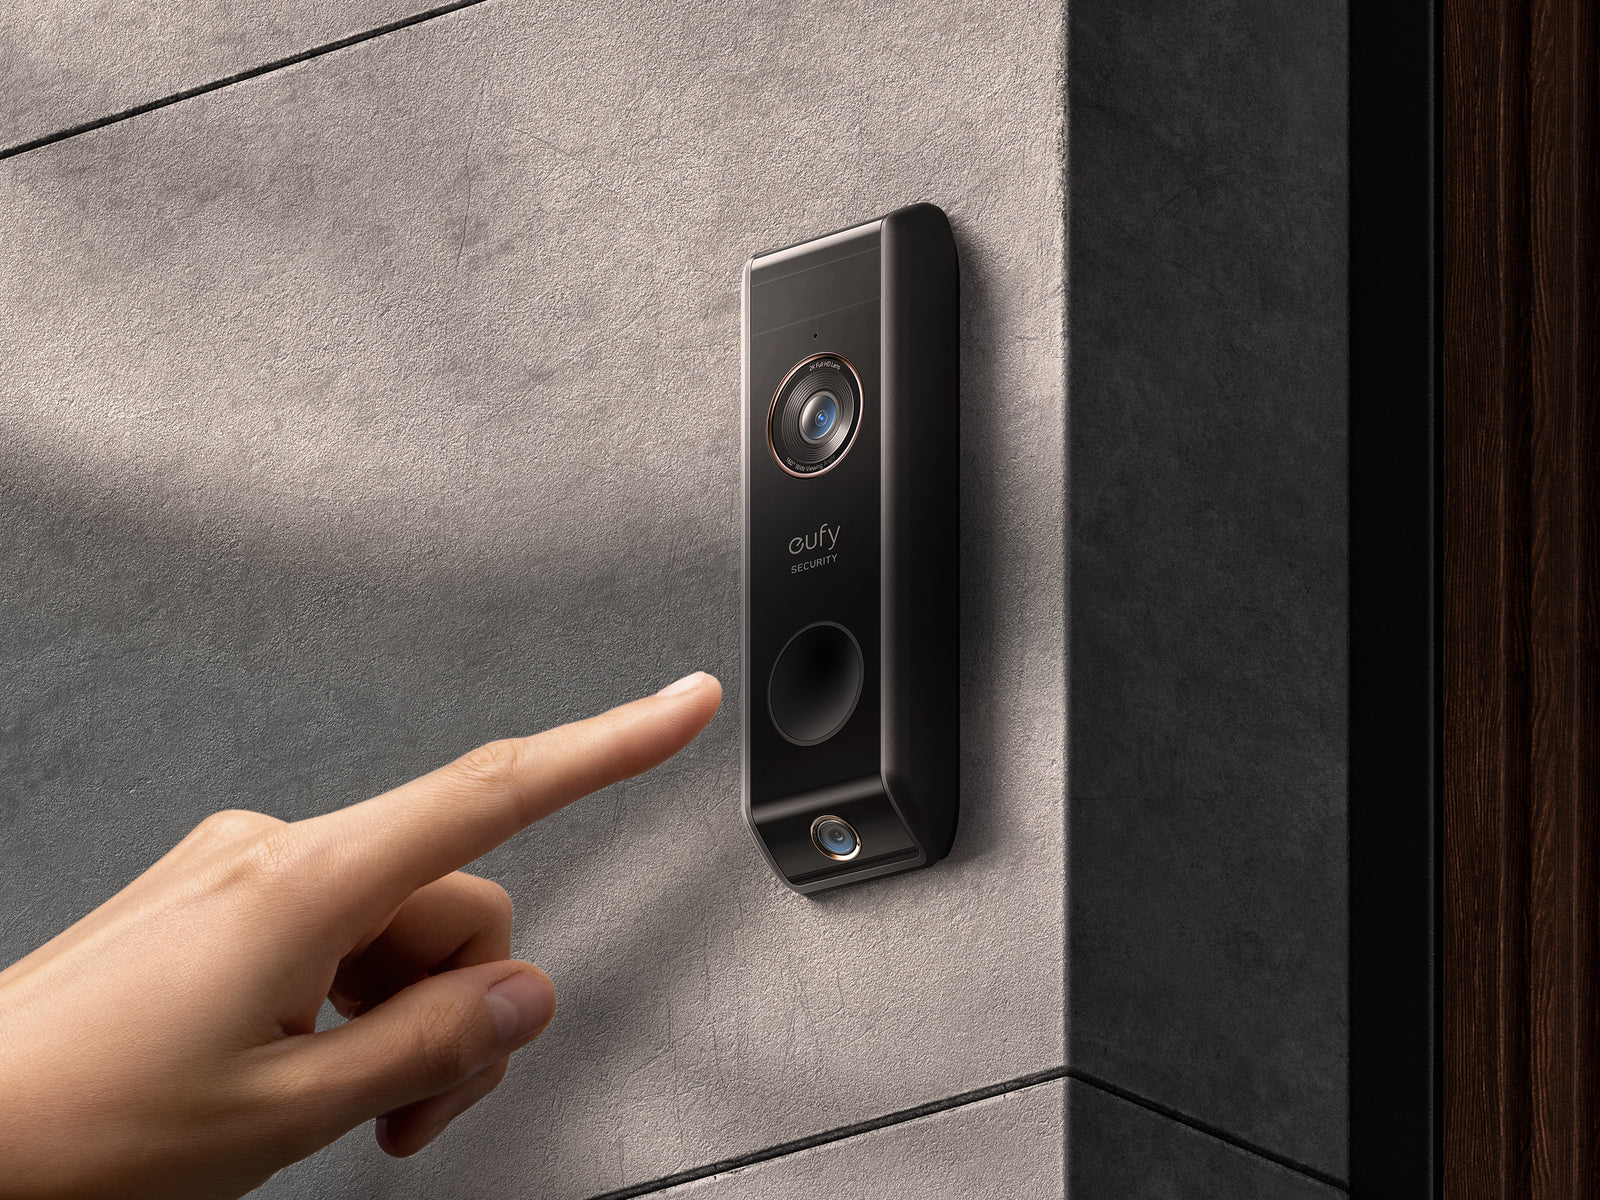 Eufy S330 Dual Camera Video Doorbell Review